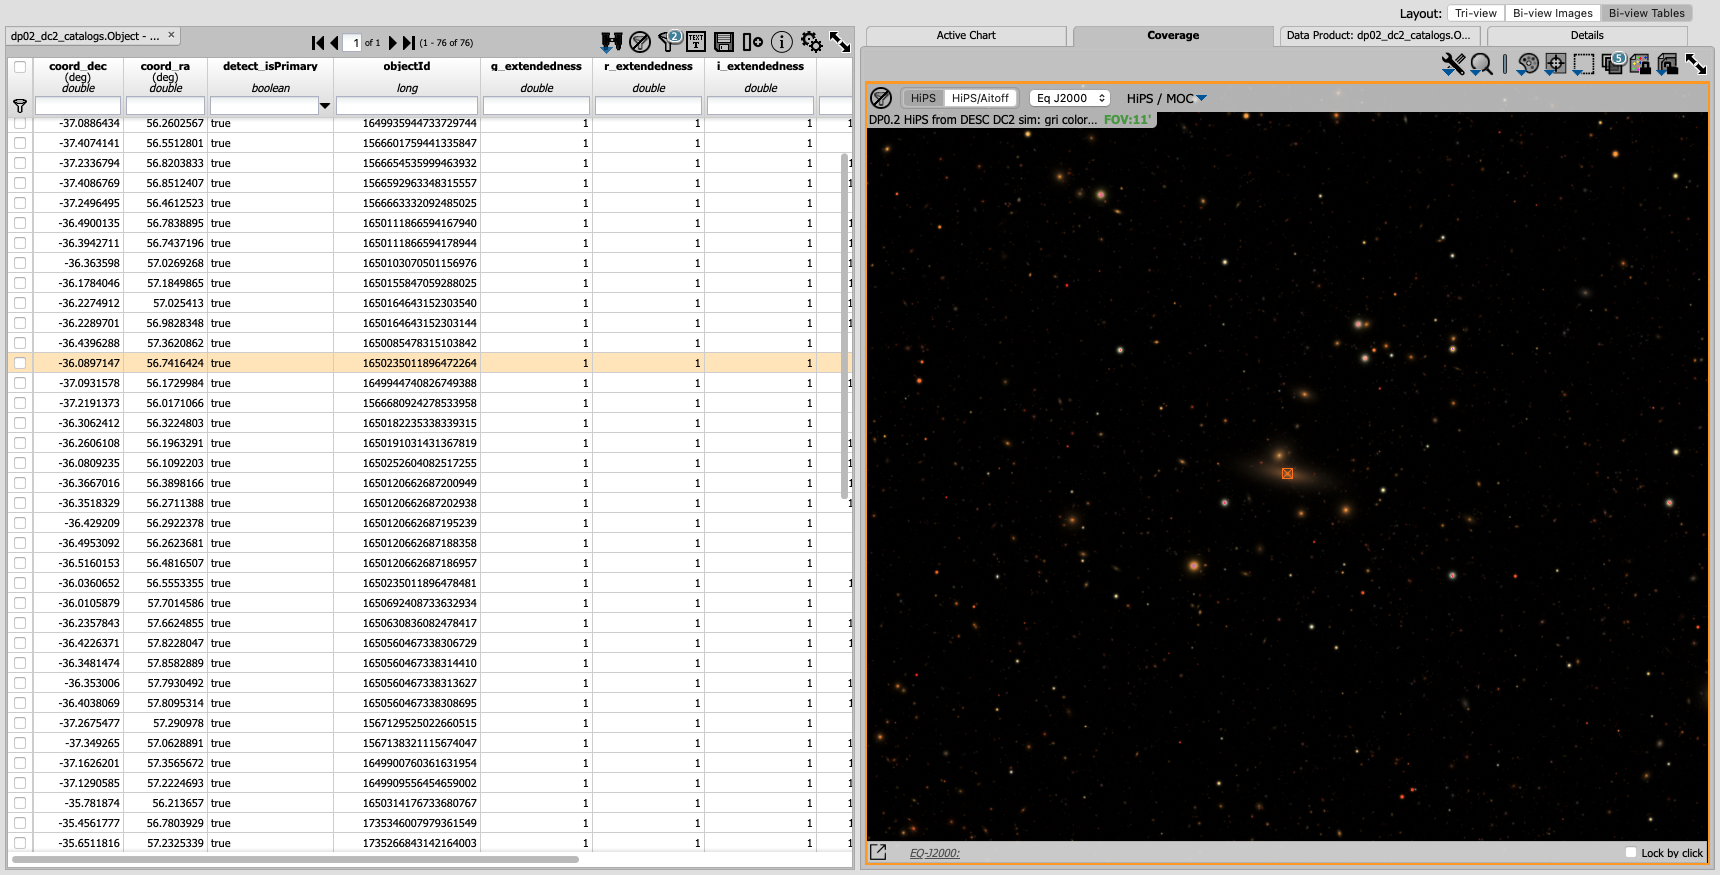 A screenshot of the image display for the elongated galaxy and table results.